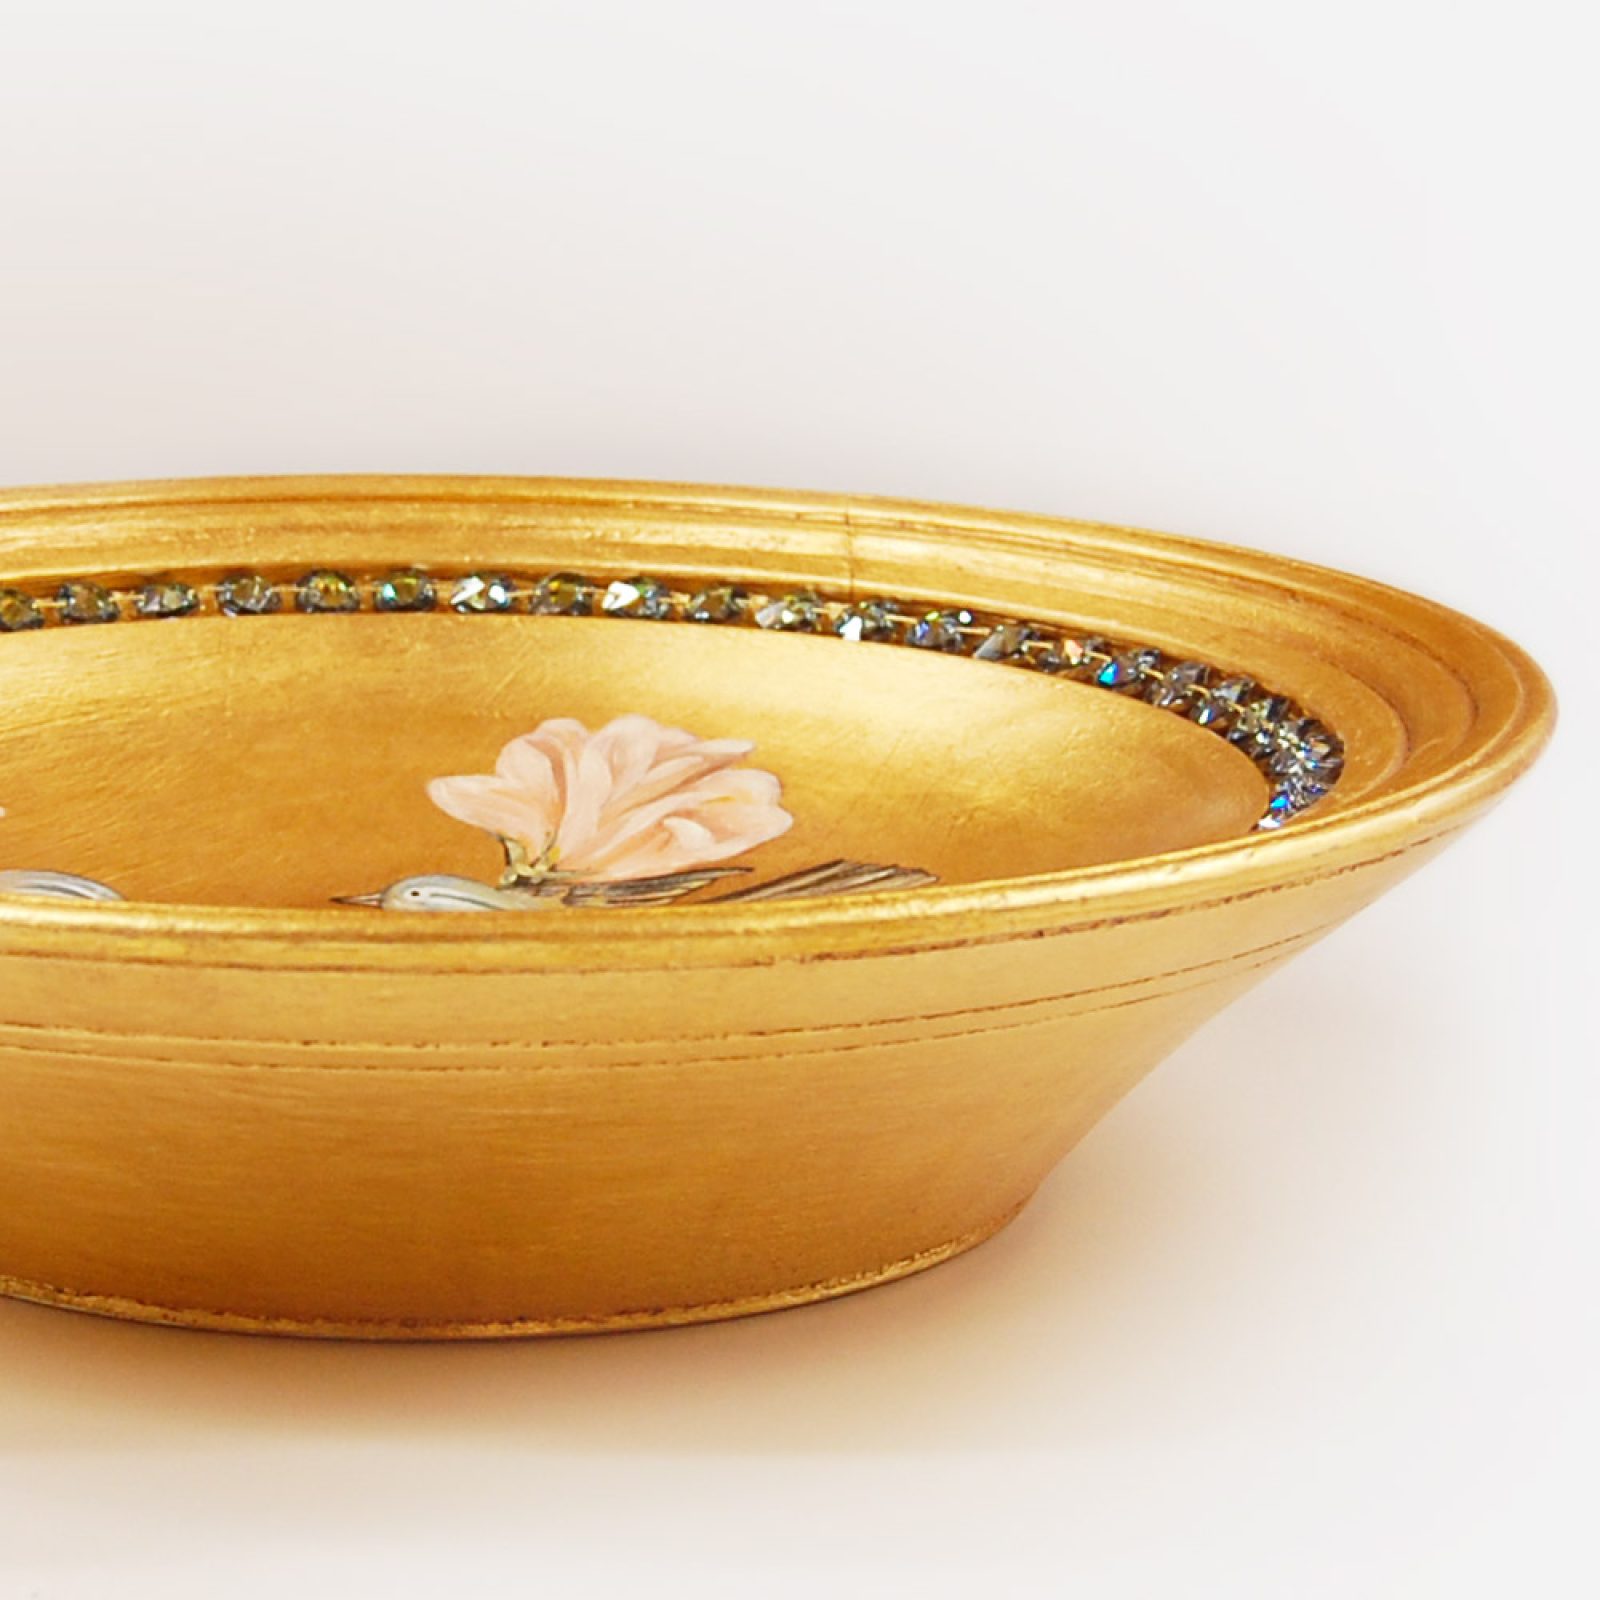 Agalma - Hand painted and gilded with 24-karat gold | Natalis Luxus